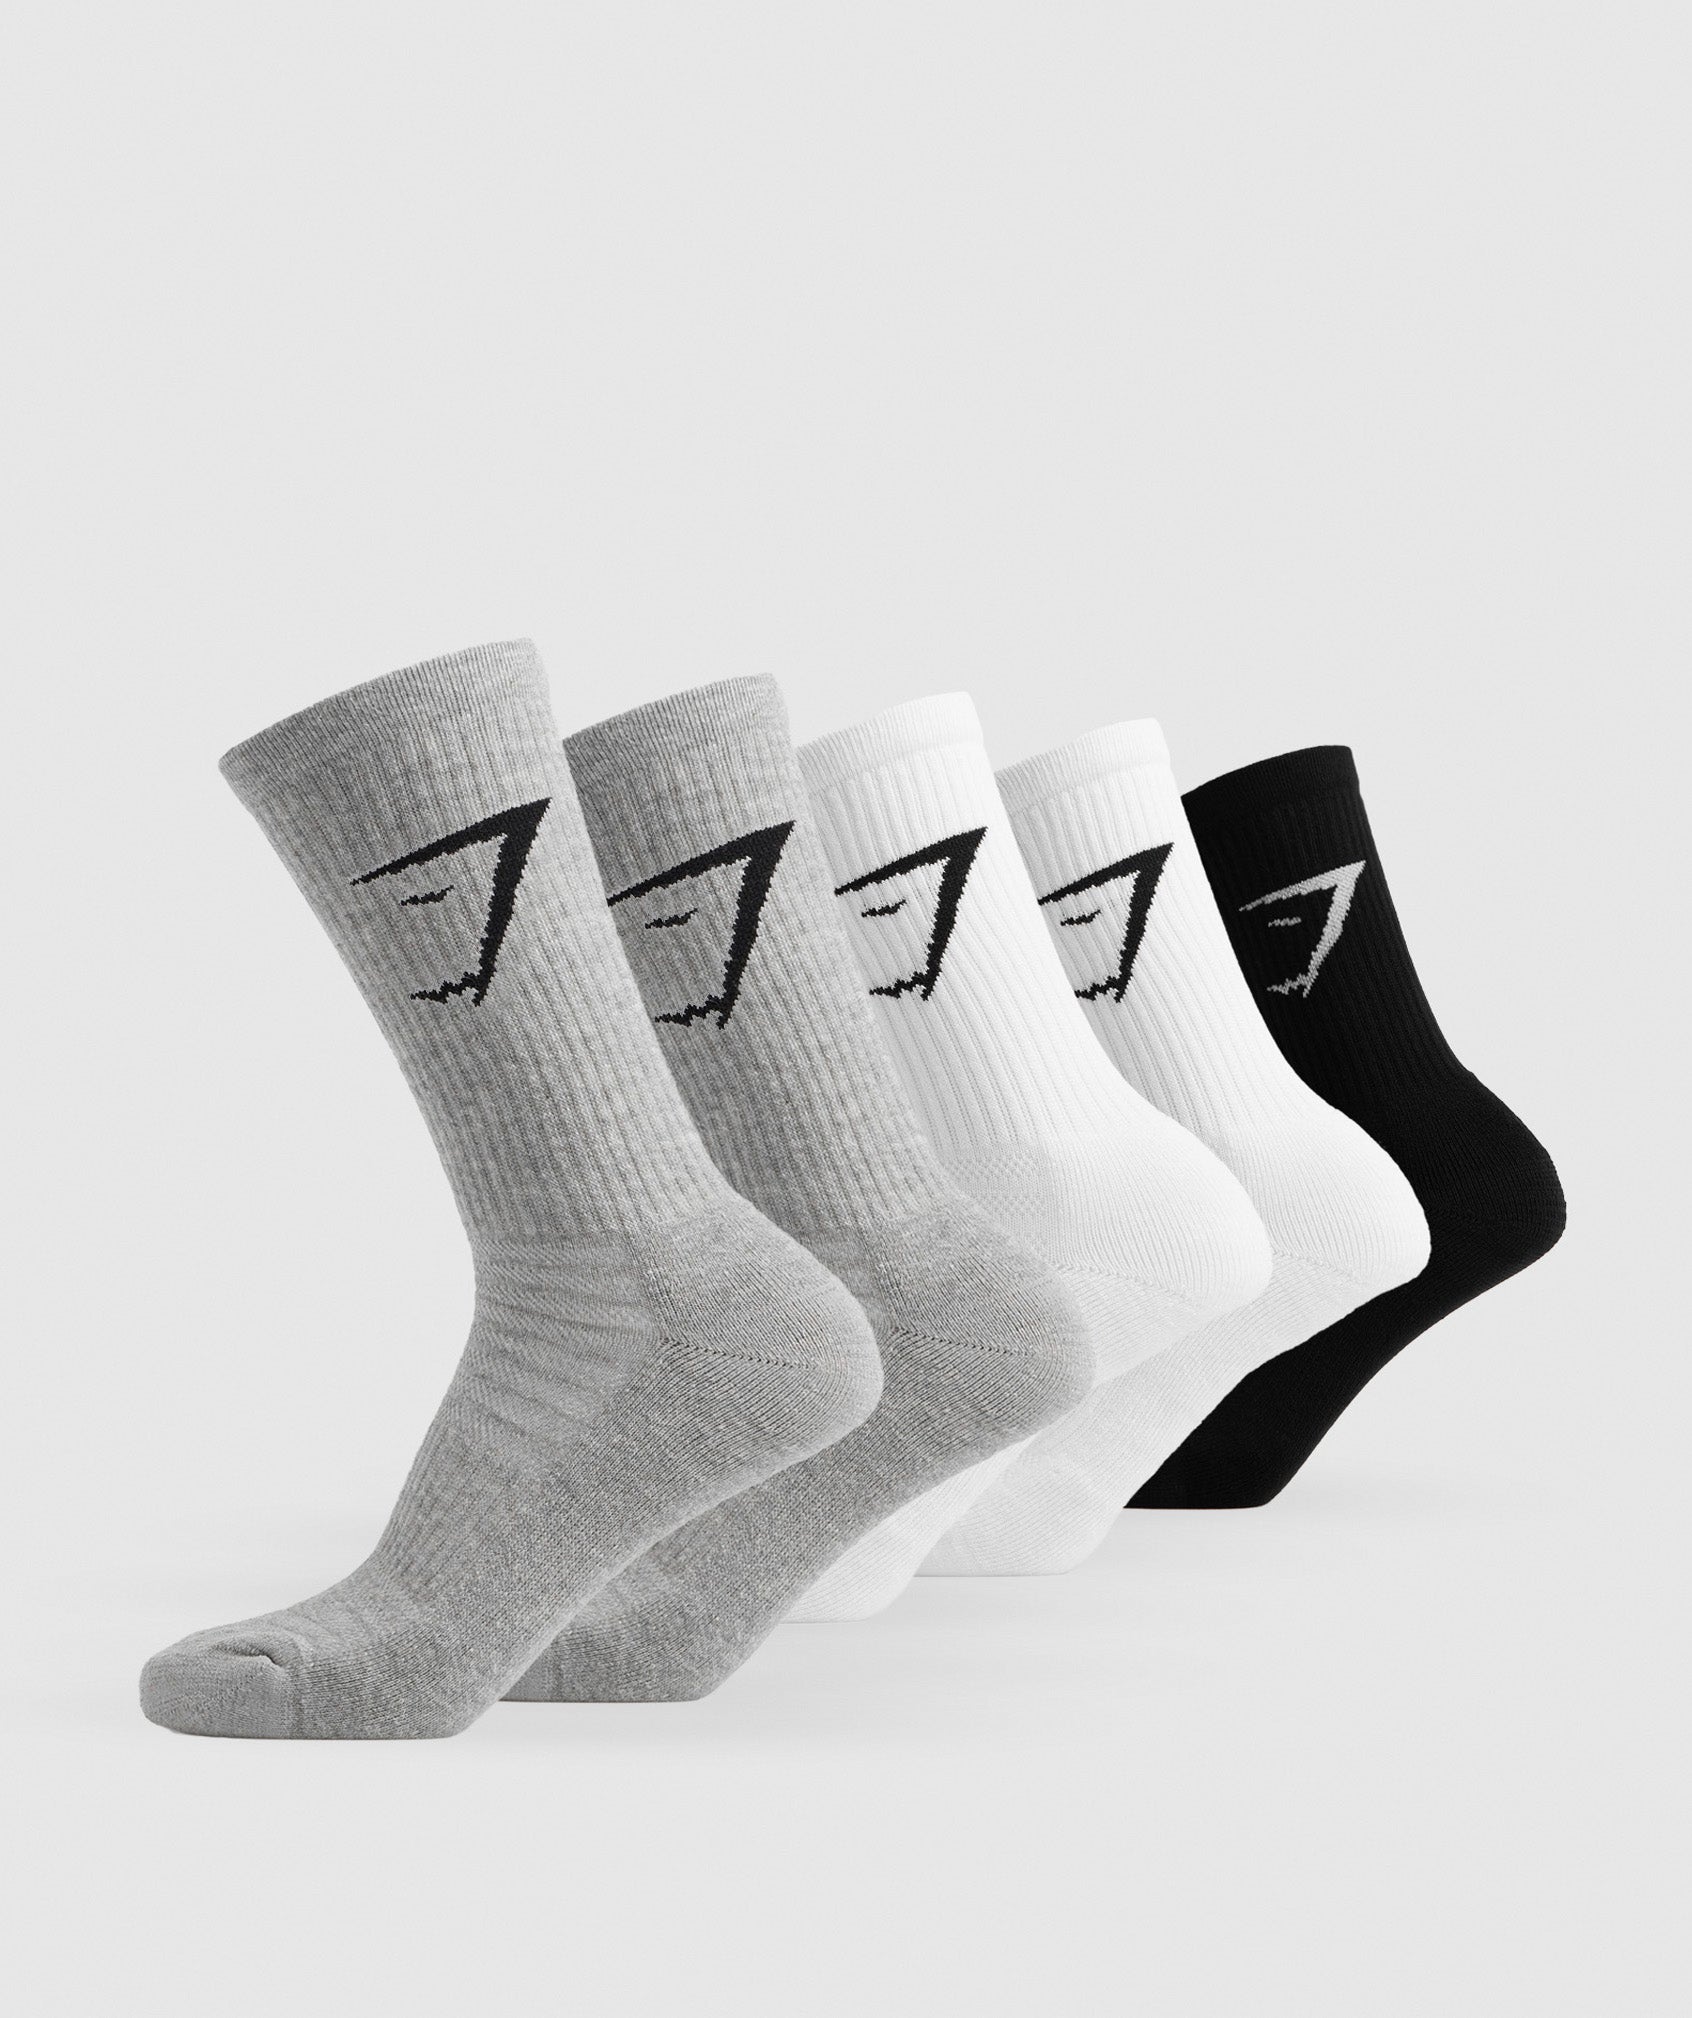 Crew Socks 5pk in White/Black/Light Grey Marl is out of stock